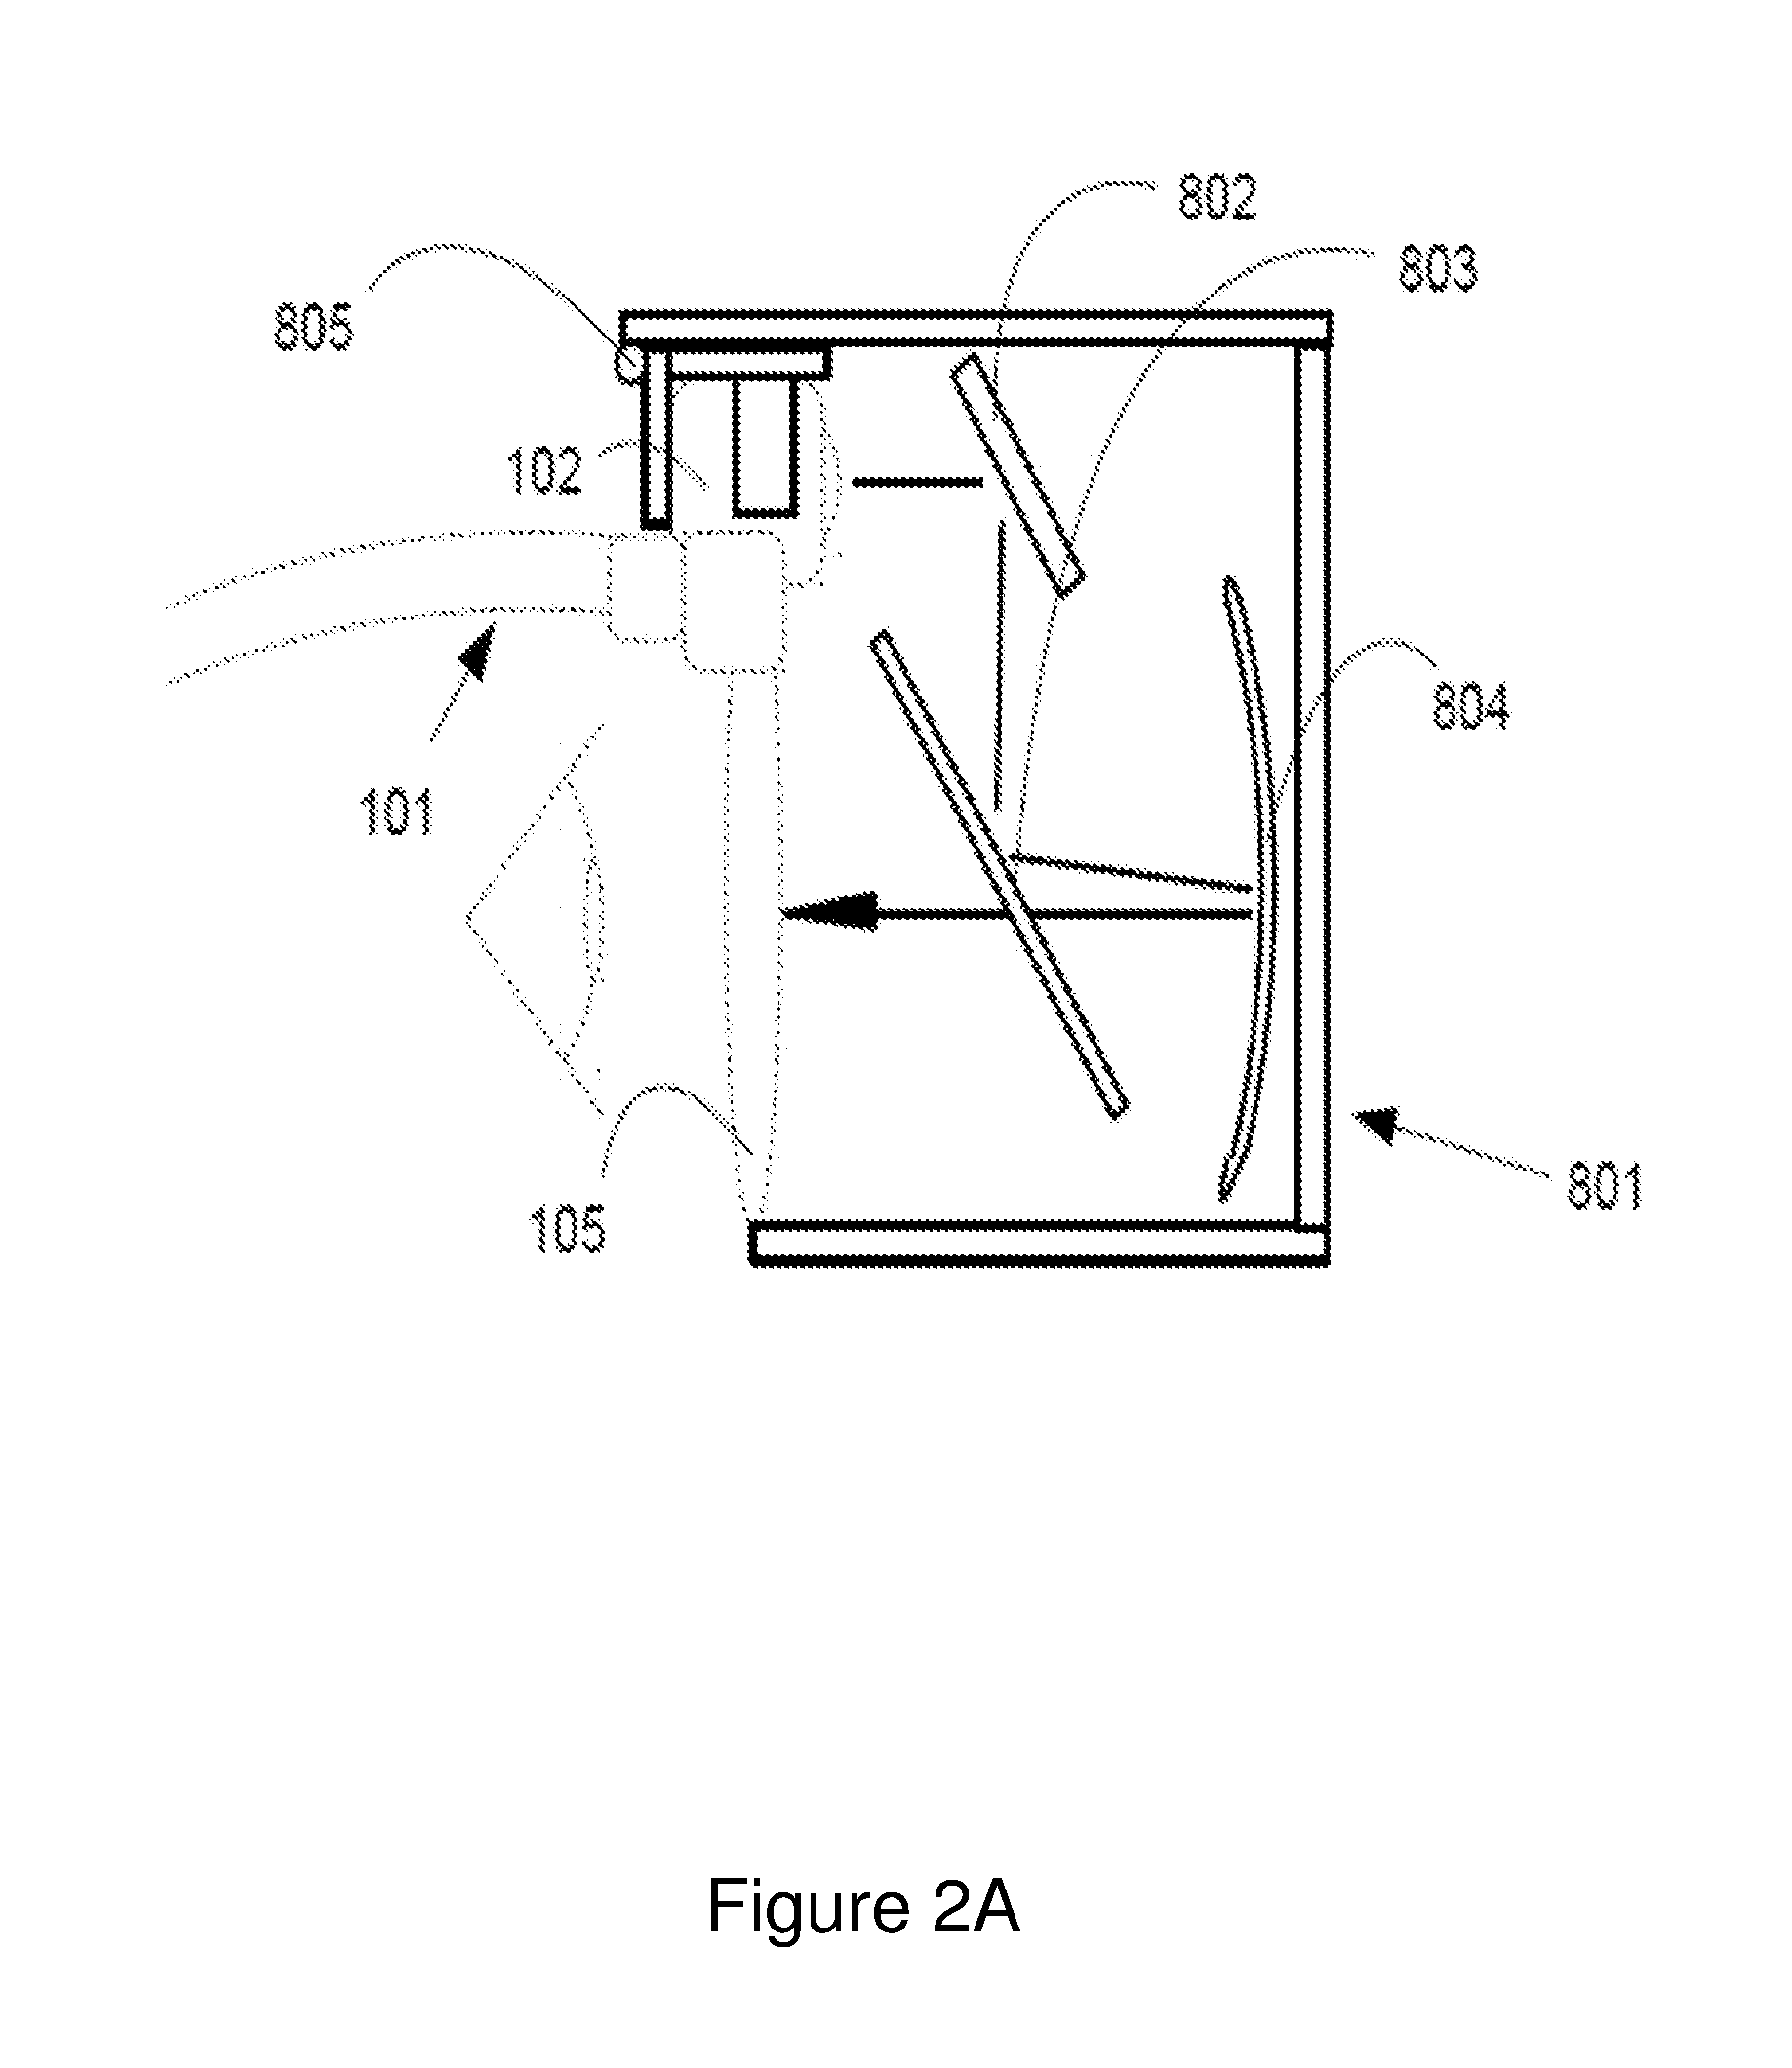 Virtual reality attachment for a head mounted display